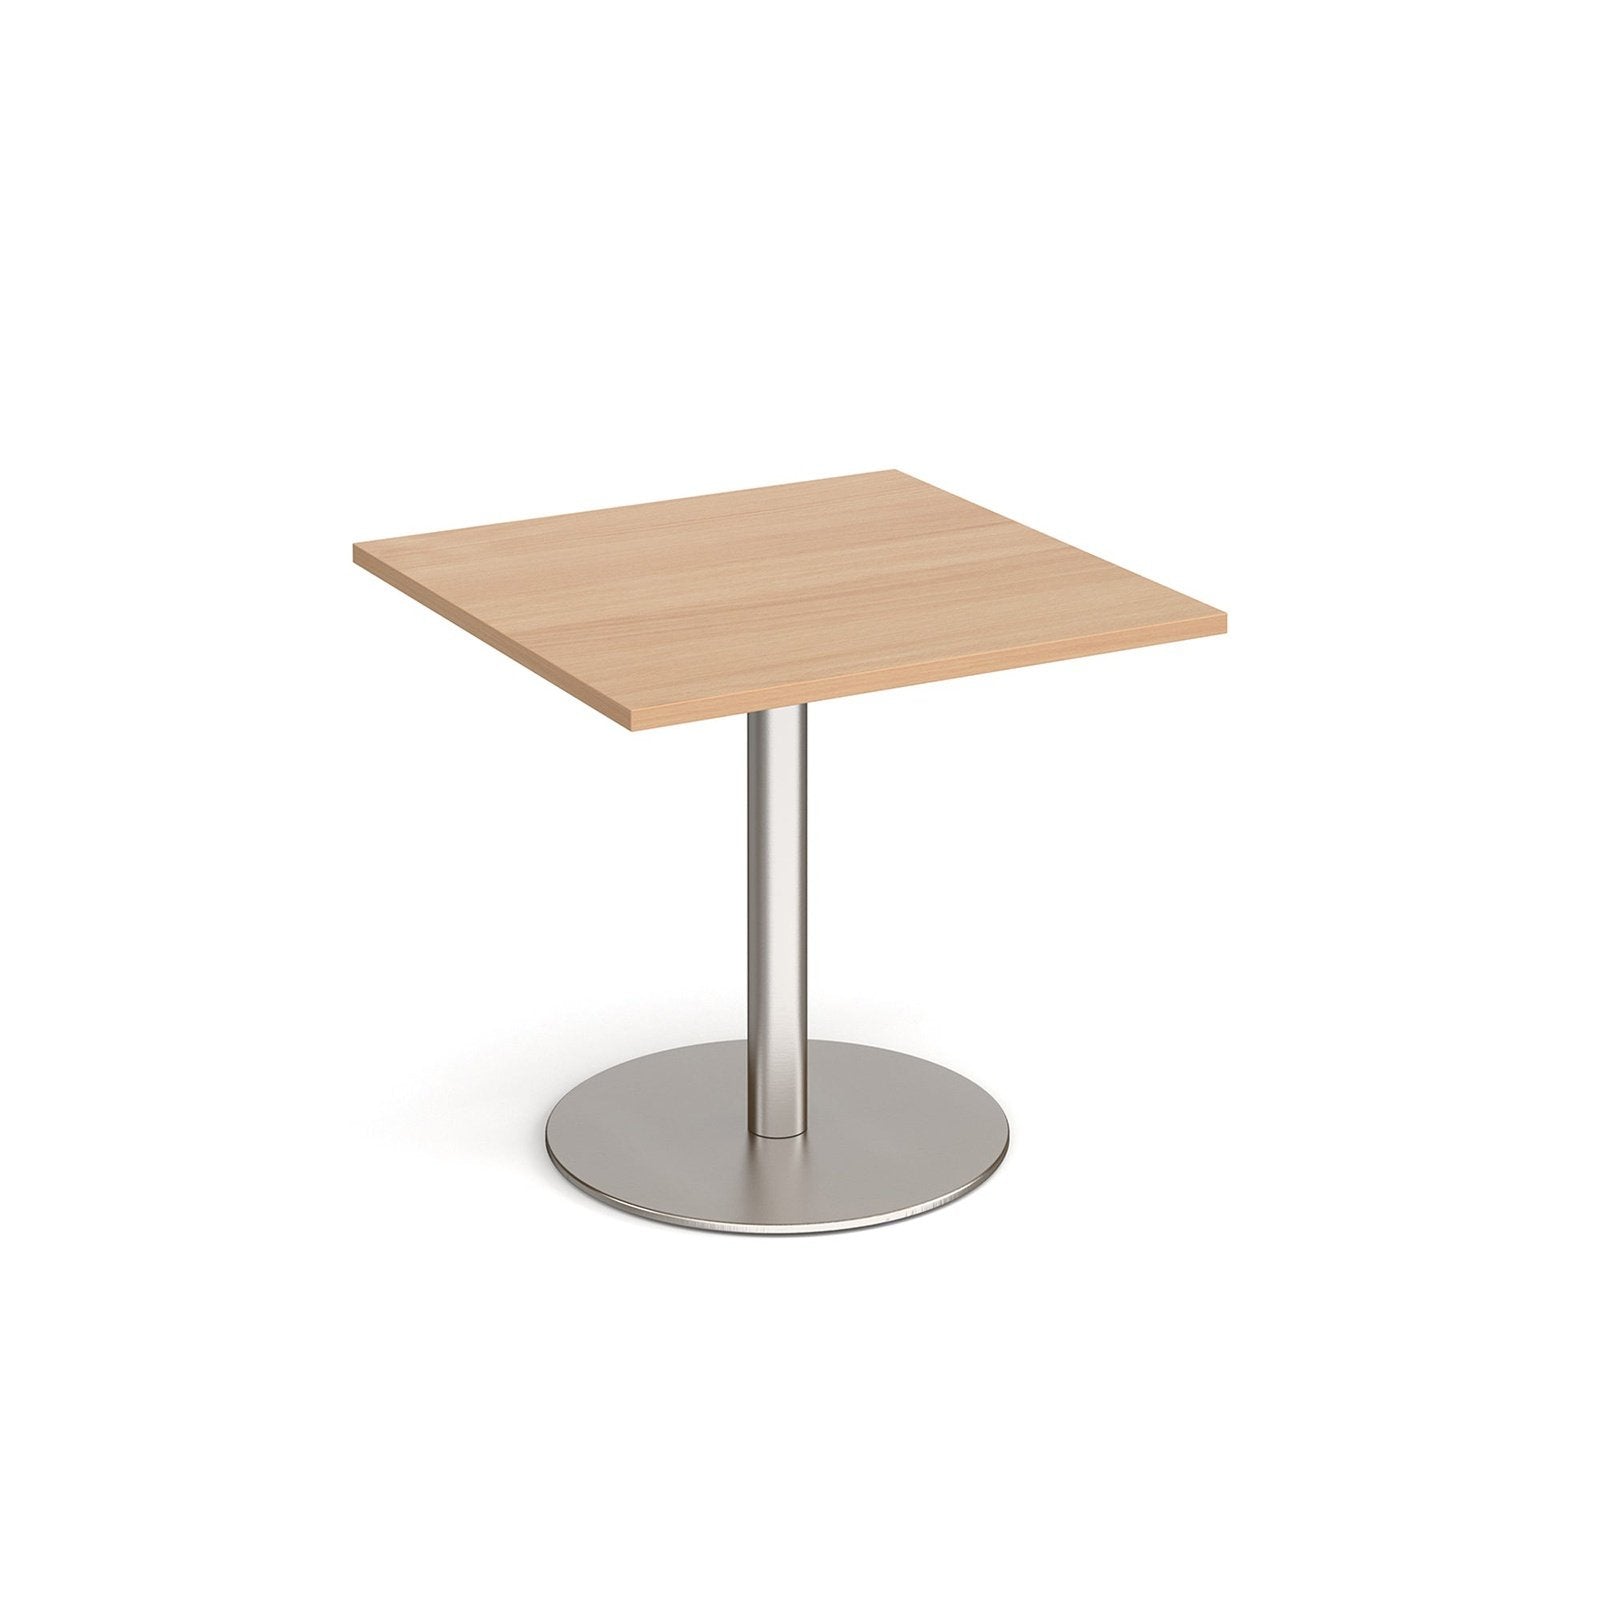 Monza square dining table with flat round base - Office Products Online